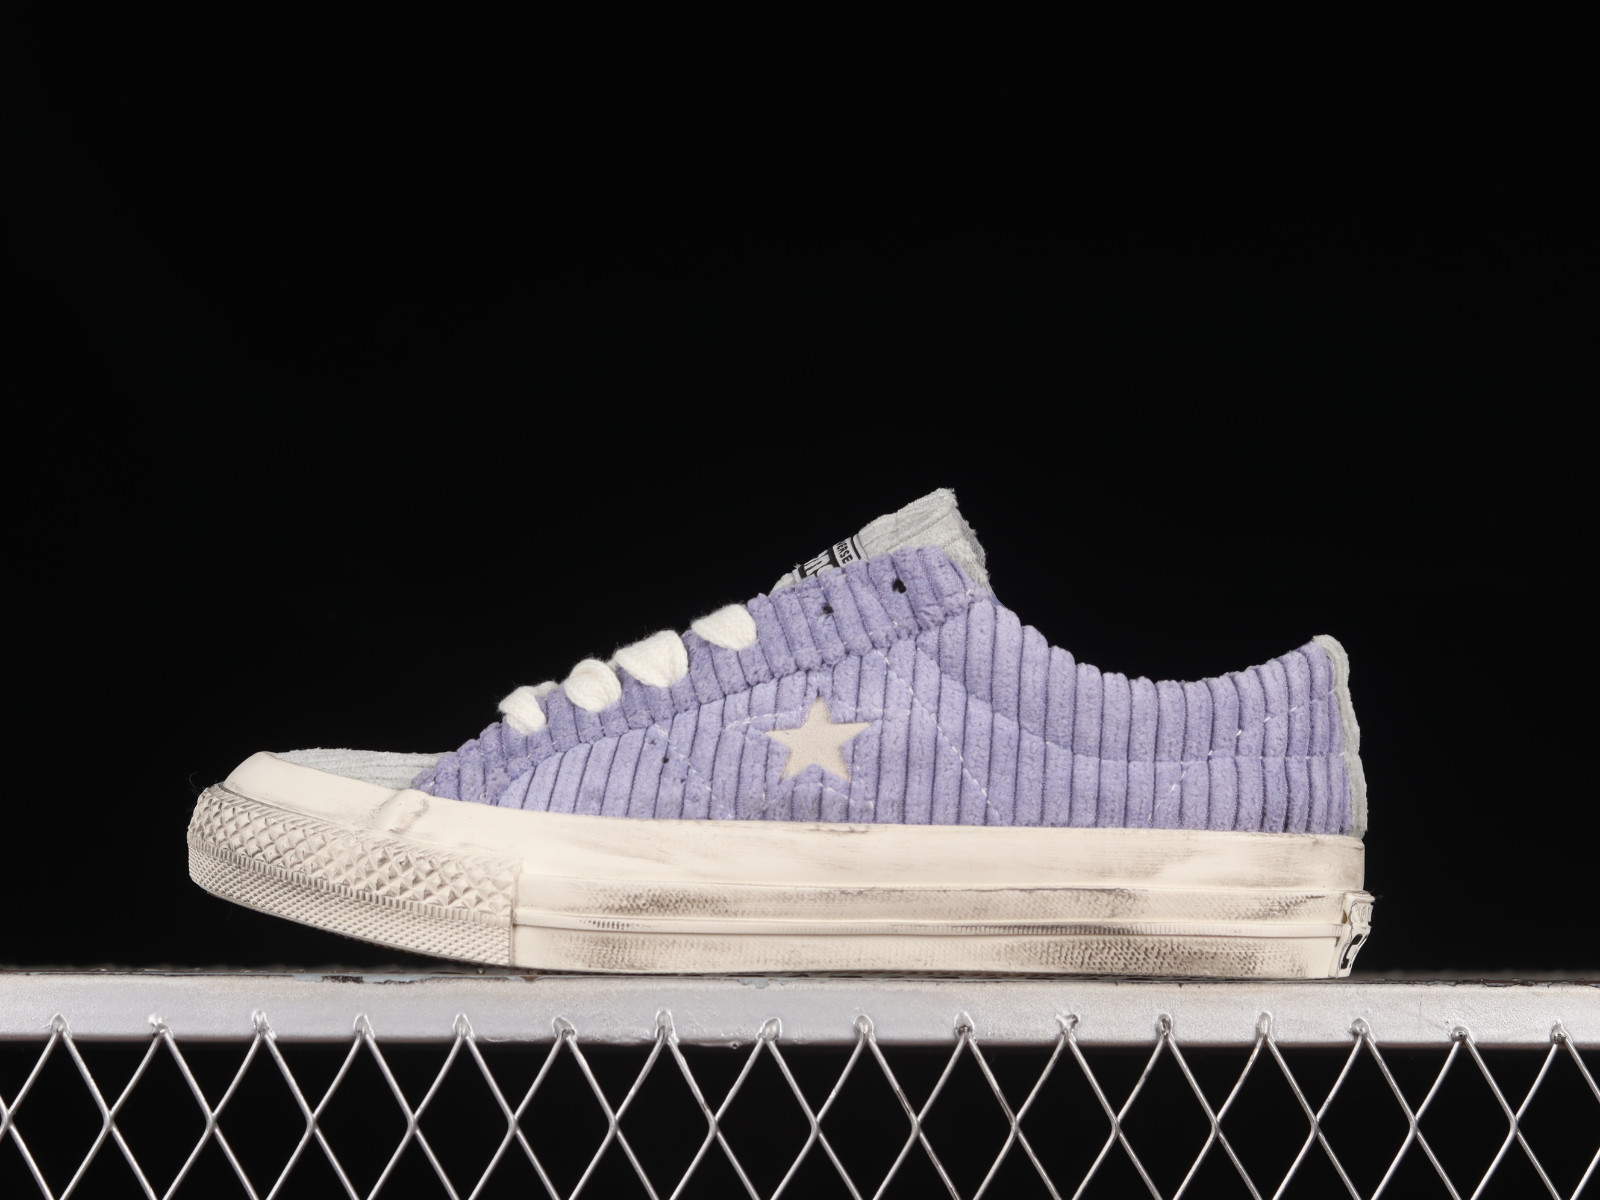 Converse One Star OX Grey A03754C - MultiscaleconsultingShops